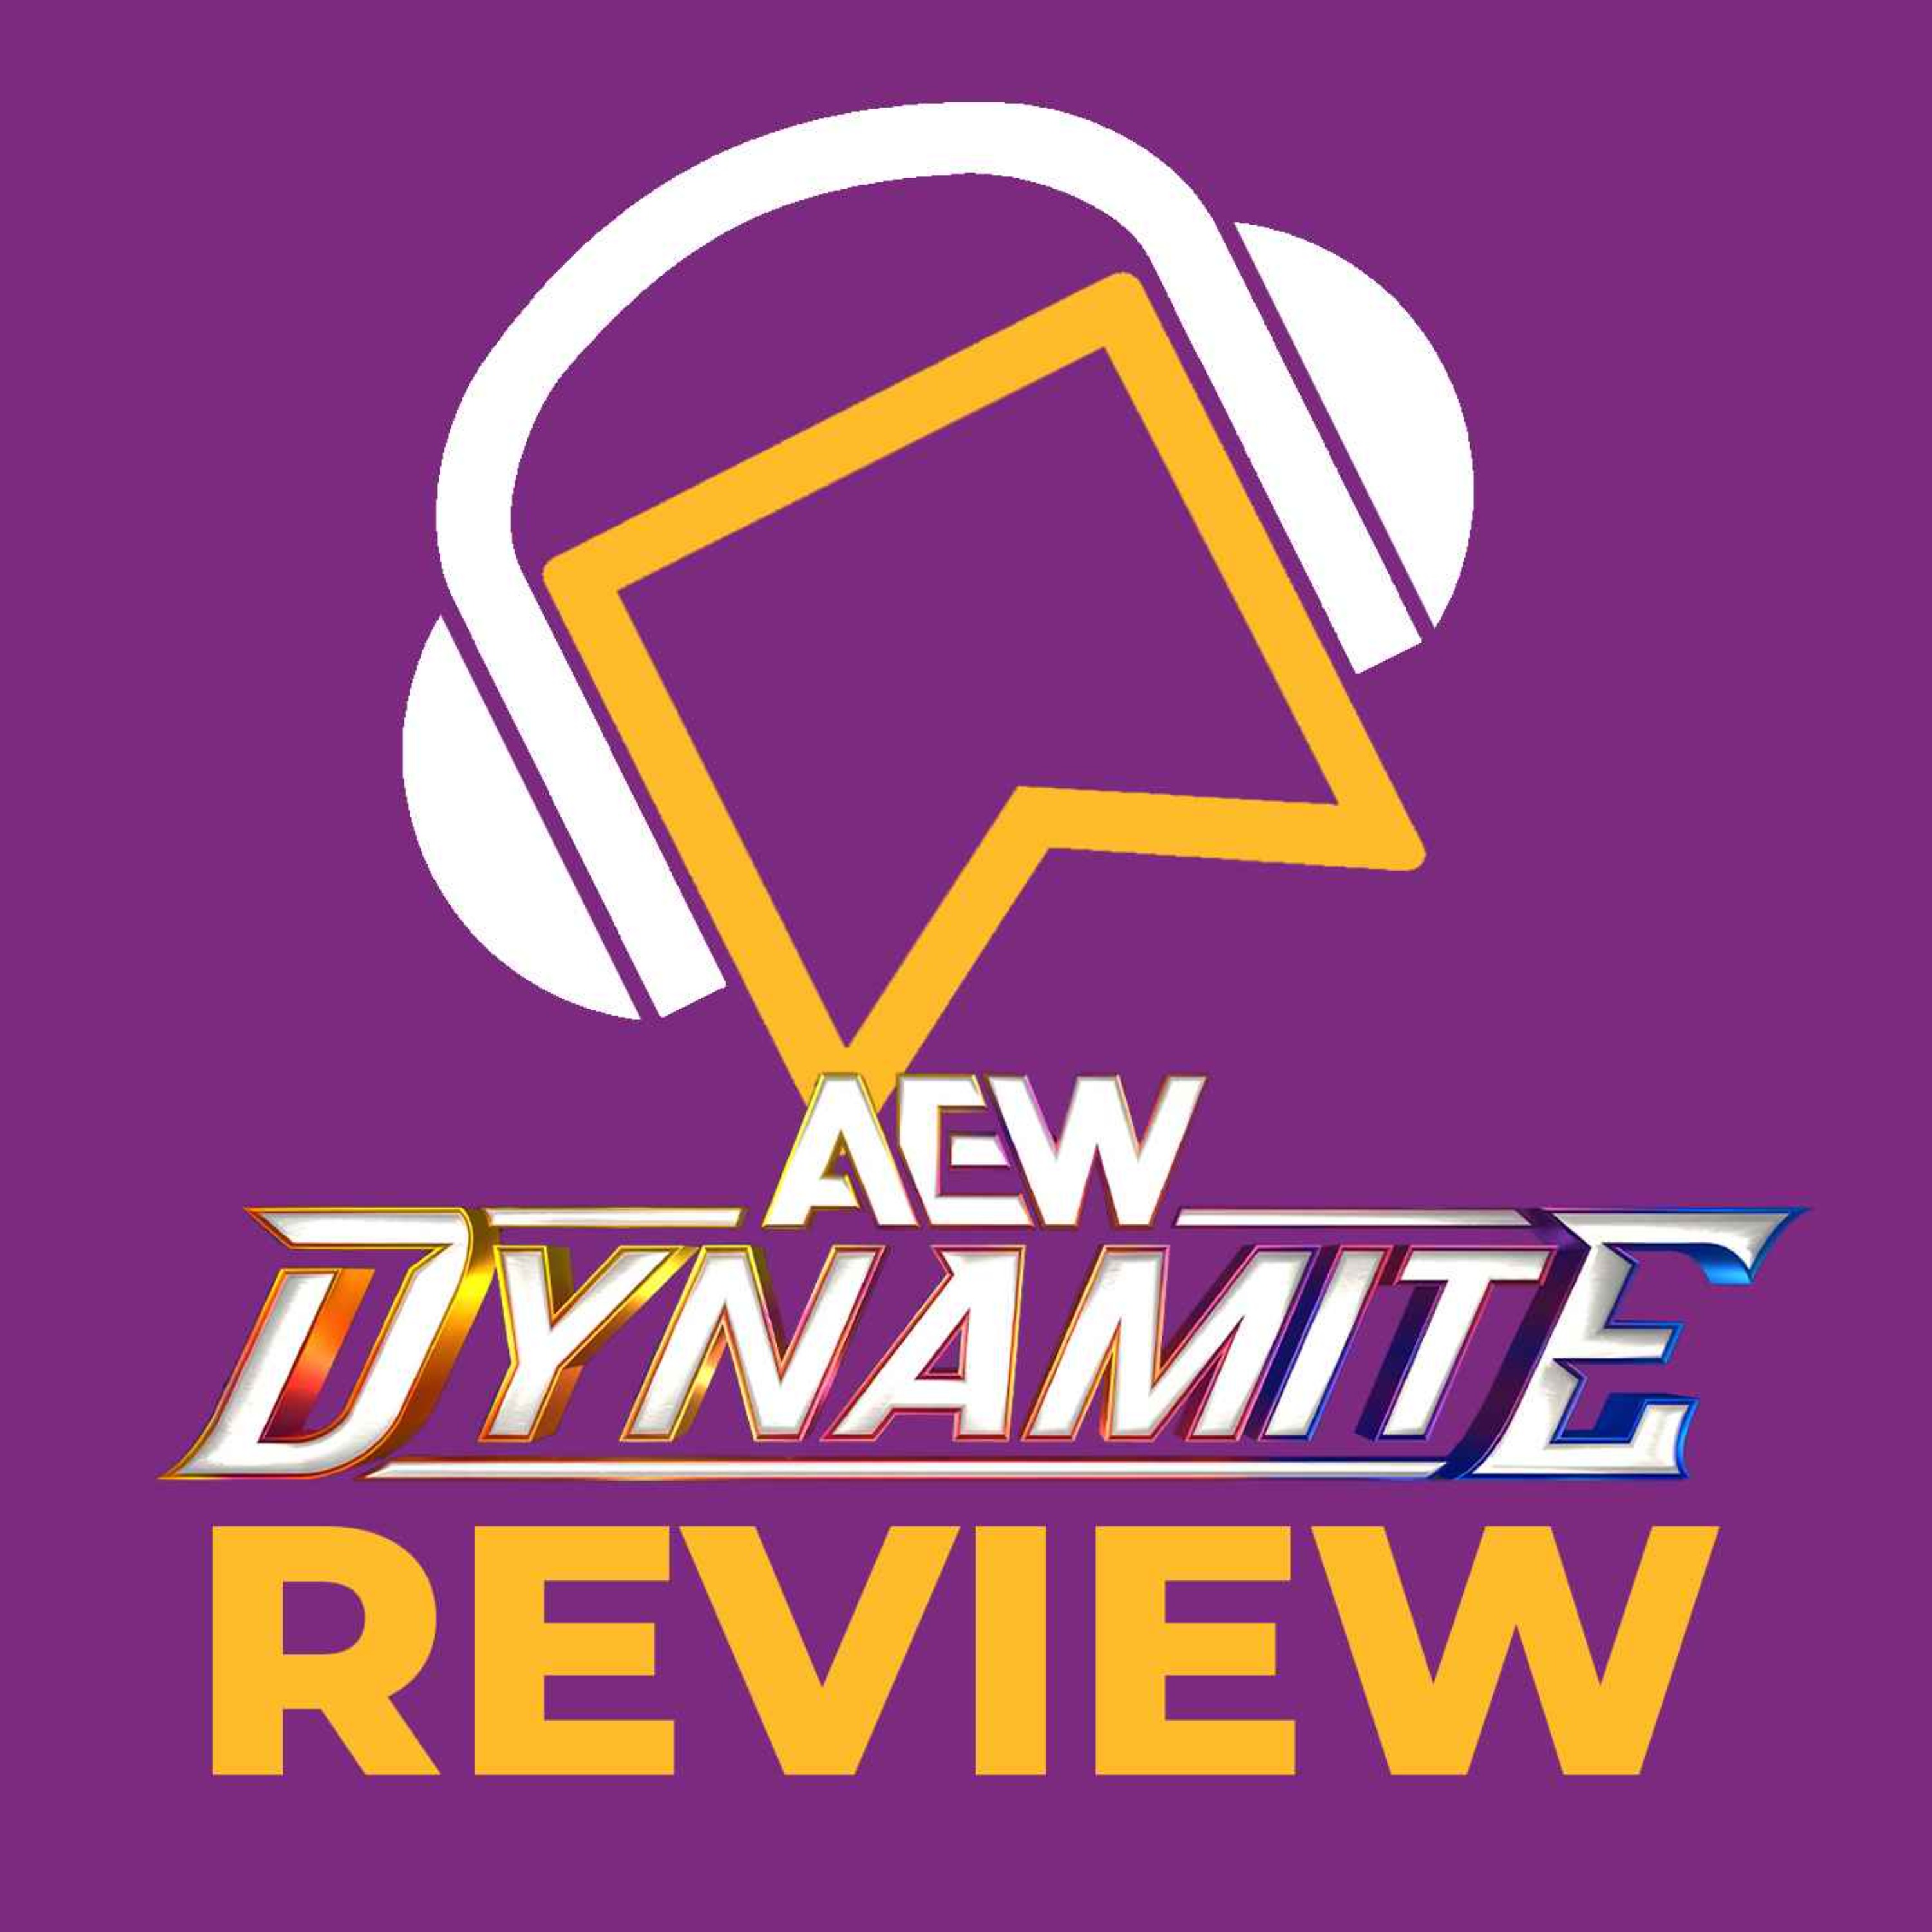 AEW Dynamite Review - The Elite Wreak HAVOC On AEW! Kenny Omega ATTACKED! Swerve’s Double Or Nothing Opponent REVEALED! Chuck Taylor Has To RETIRE?!